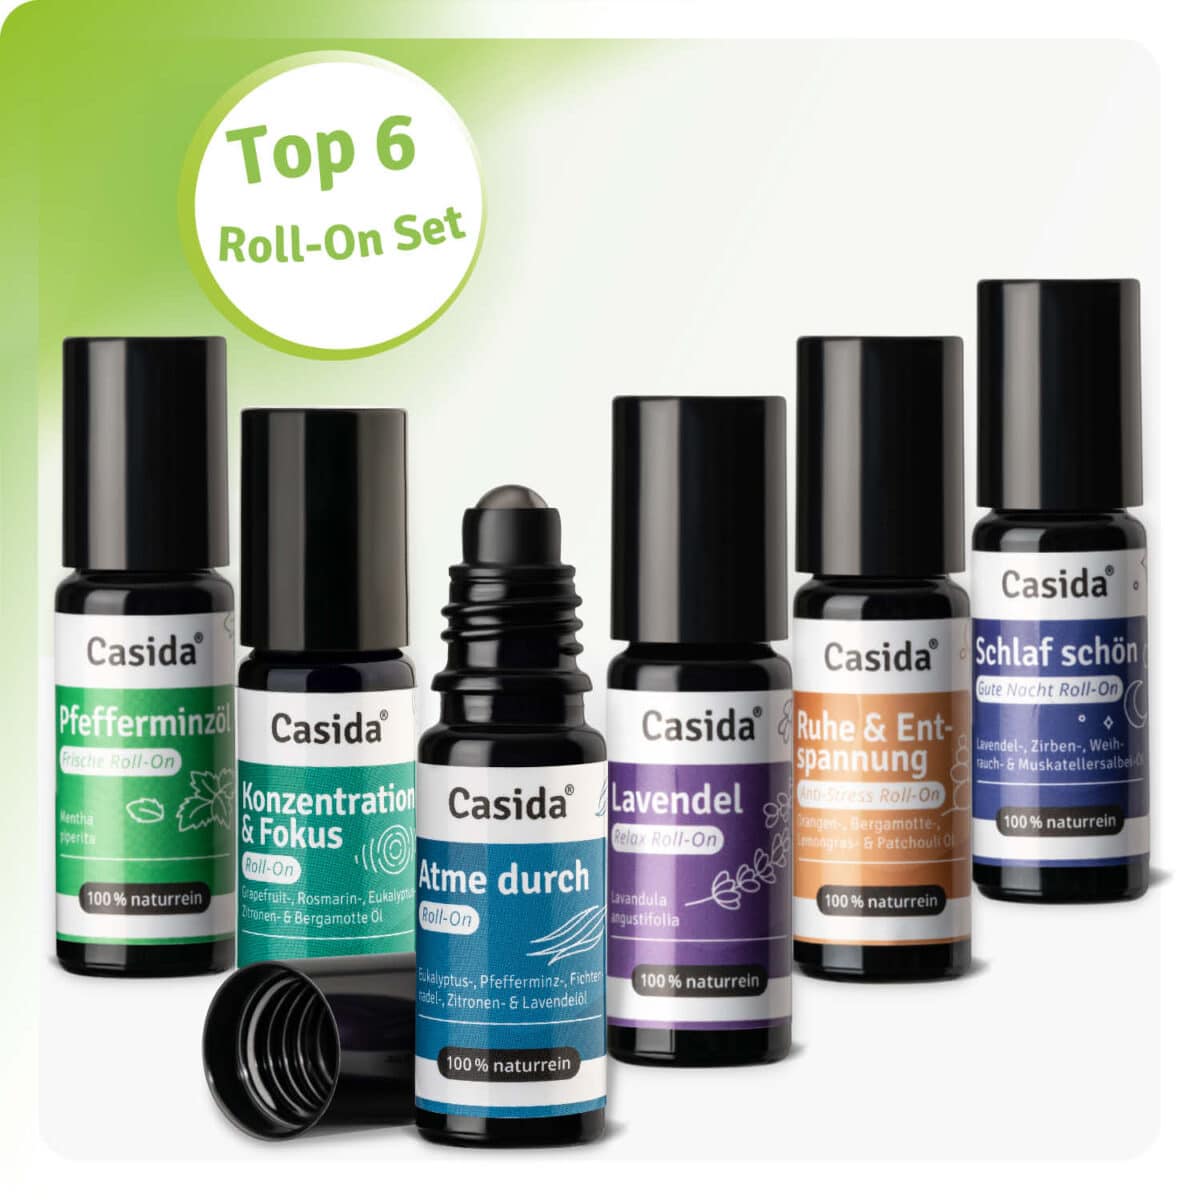 TOP 6 Roll-On Set